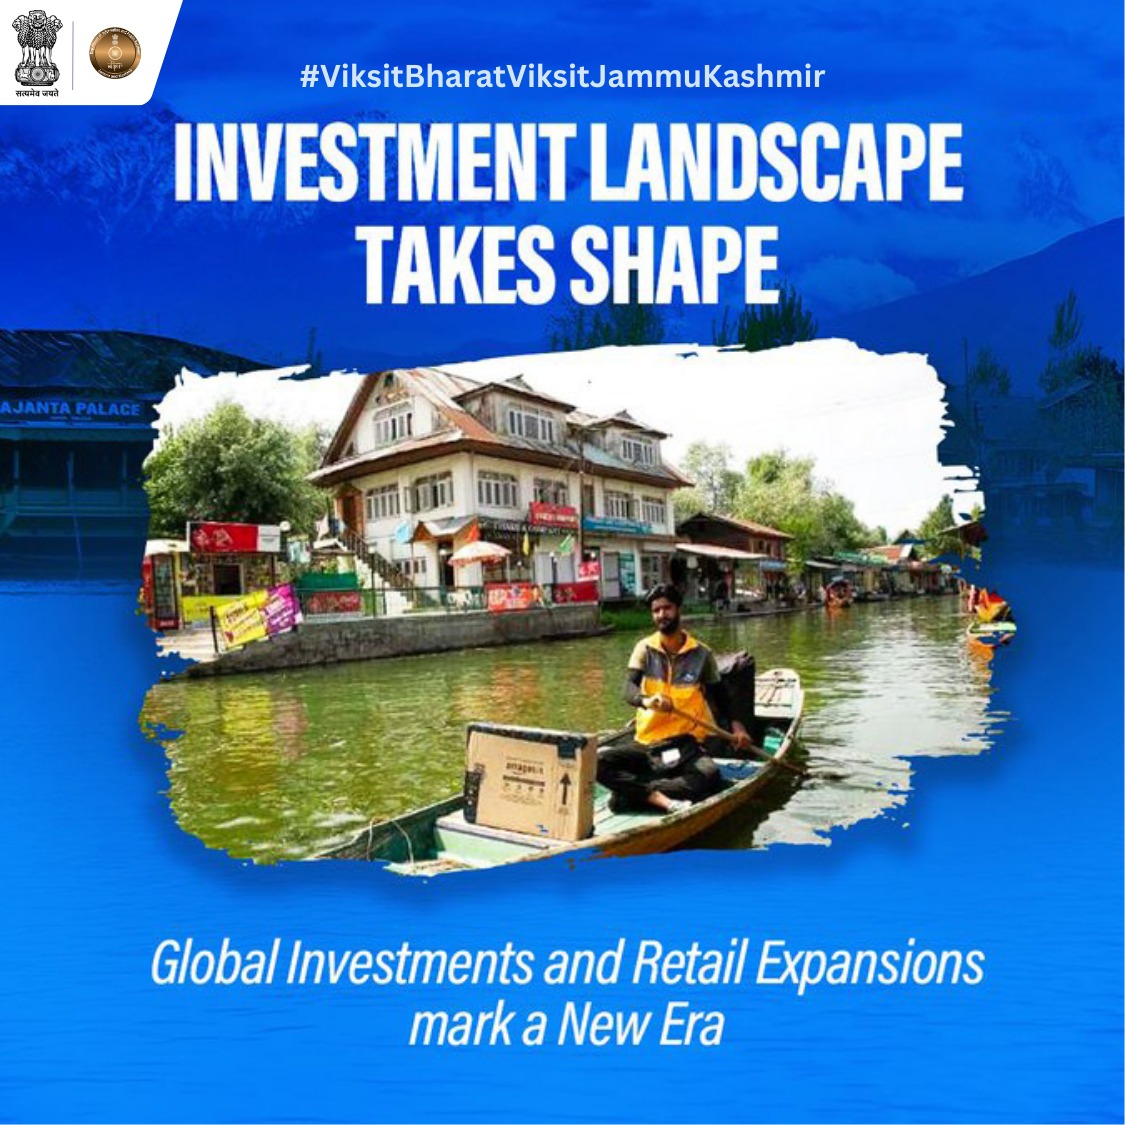 #ViksitBharatViksitJnK 'Investment Landscape Takes Shape' announcing a new era of global investments and retail expansions in Jammu and Kashmir, India. #PminKashmir @PMOIndia @HMOIndia @MIB_India @OfficeOfLGJandK @PIB_India @DDNewslive